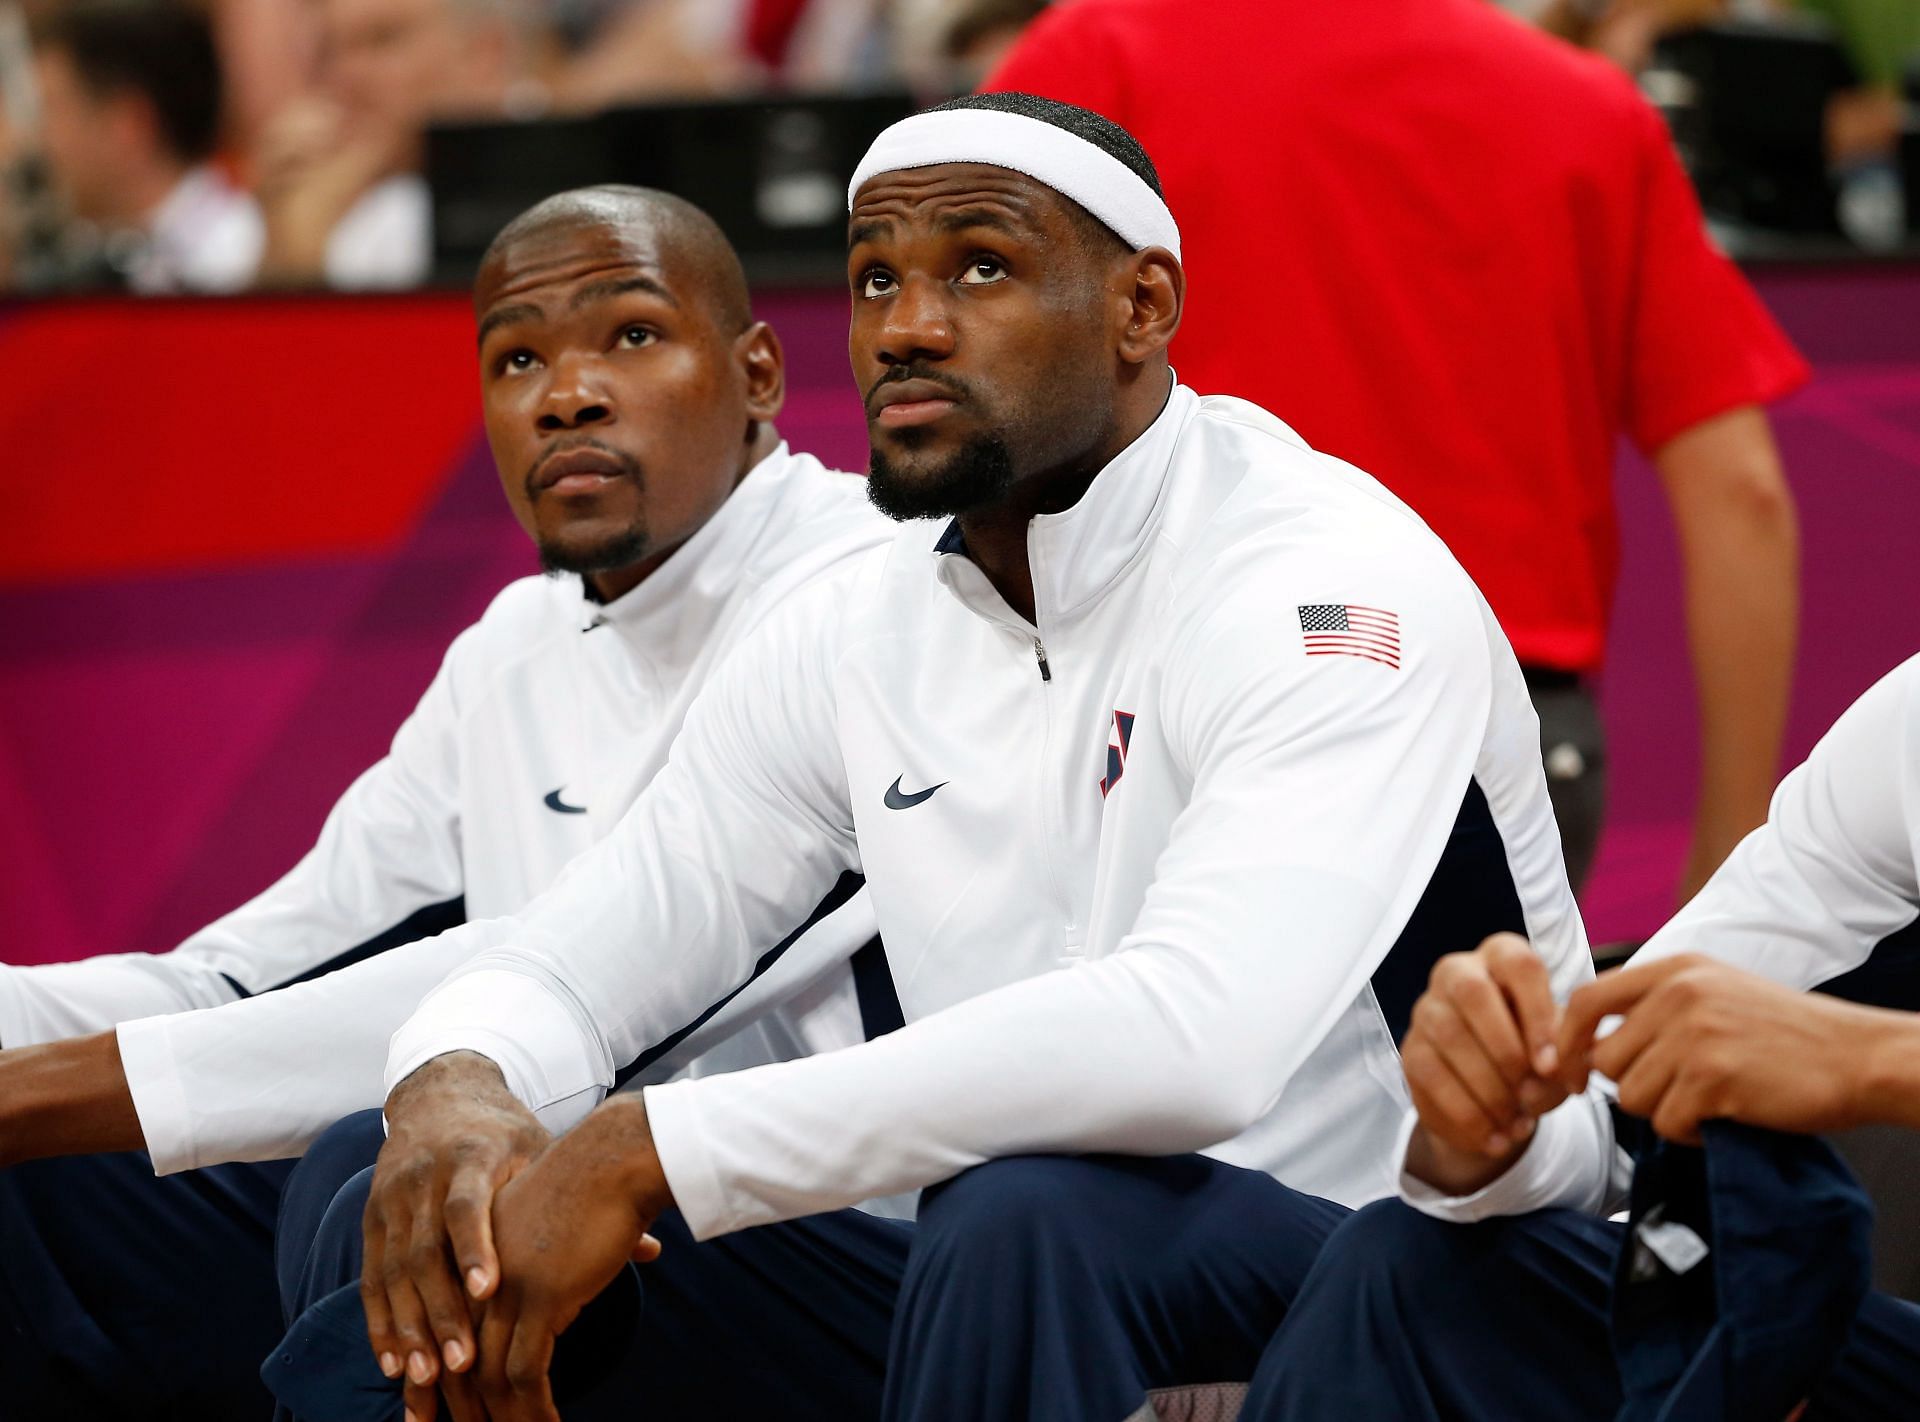 Kevin Durant and LeBron James during the 2012 London Olympics